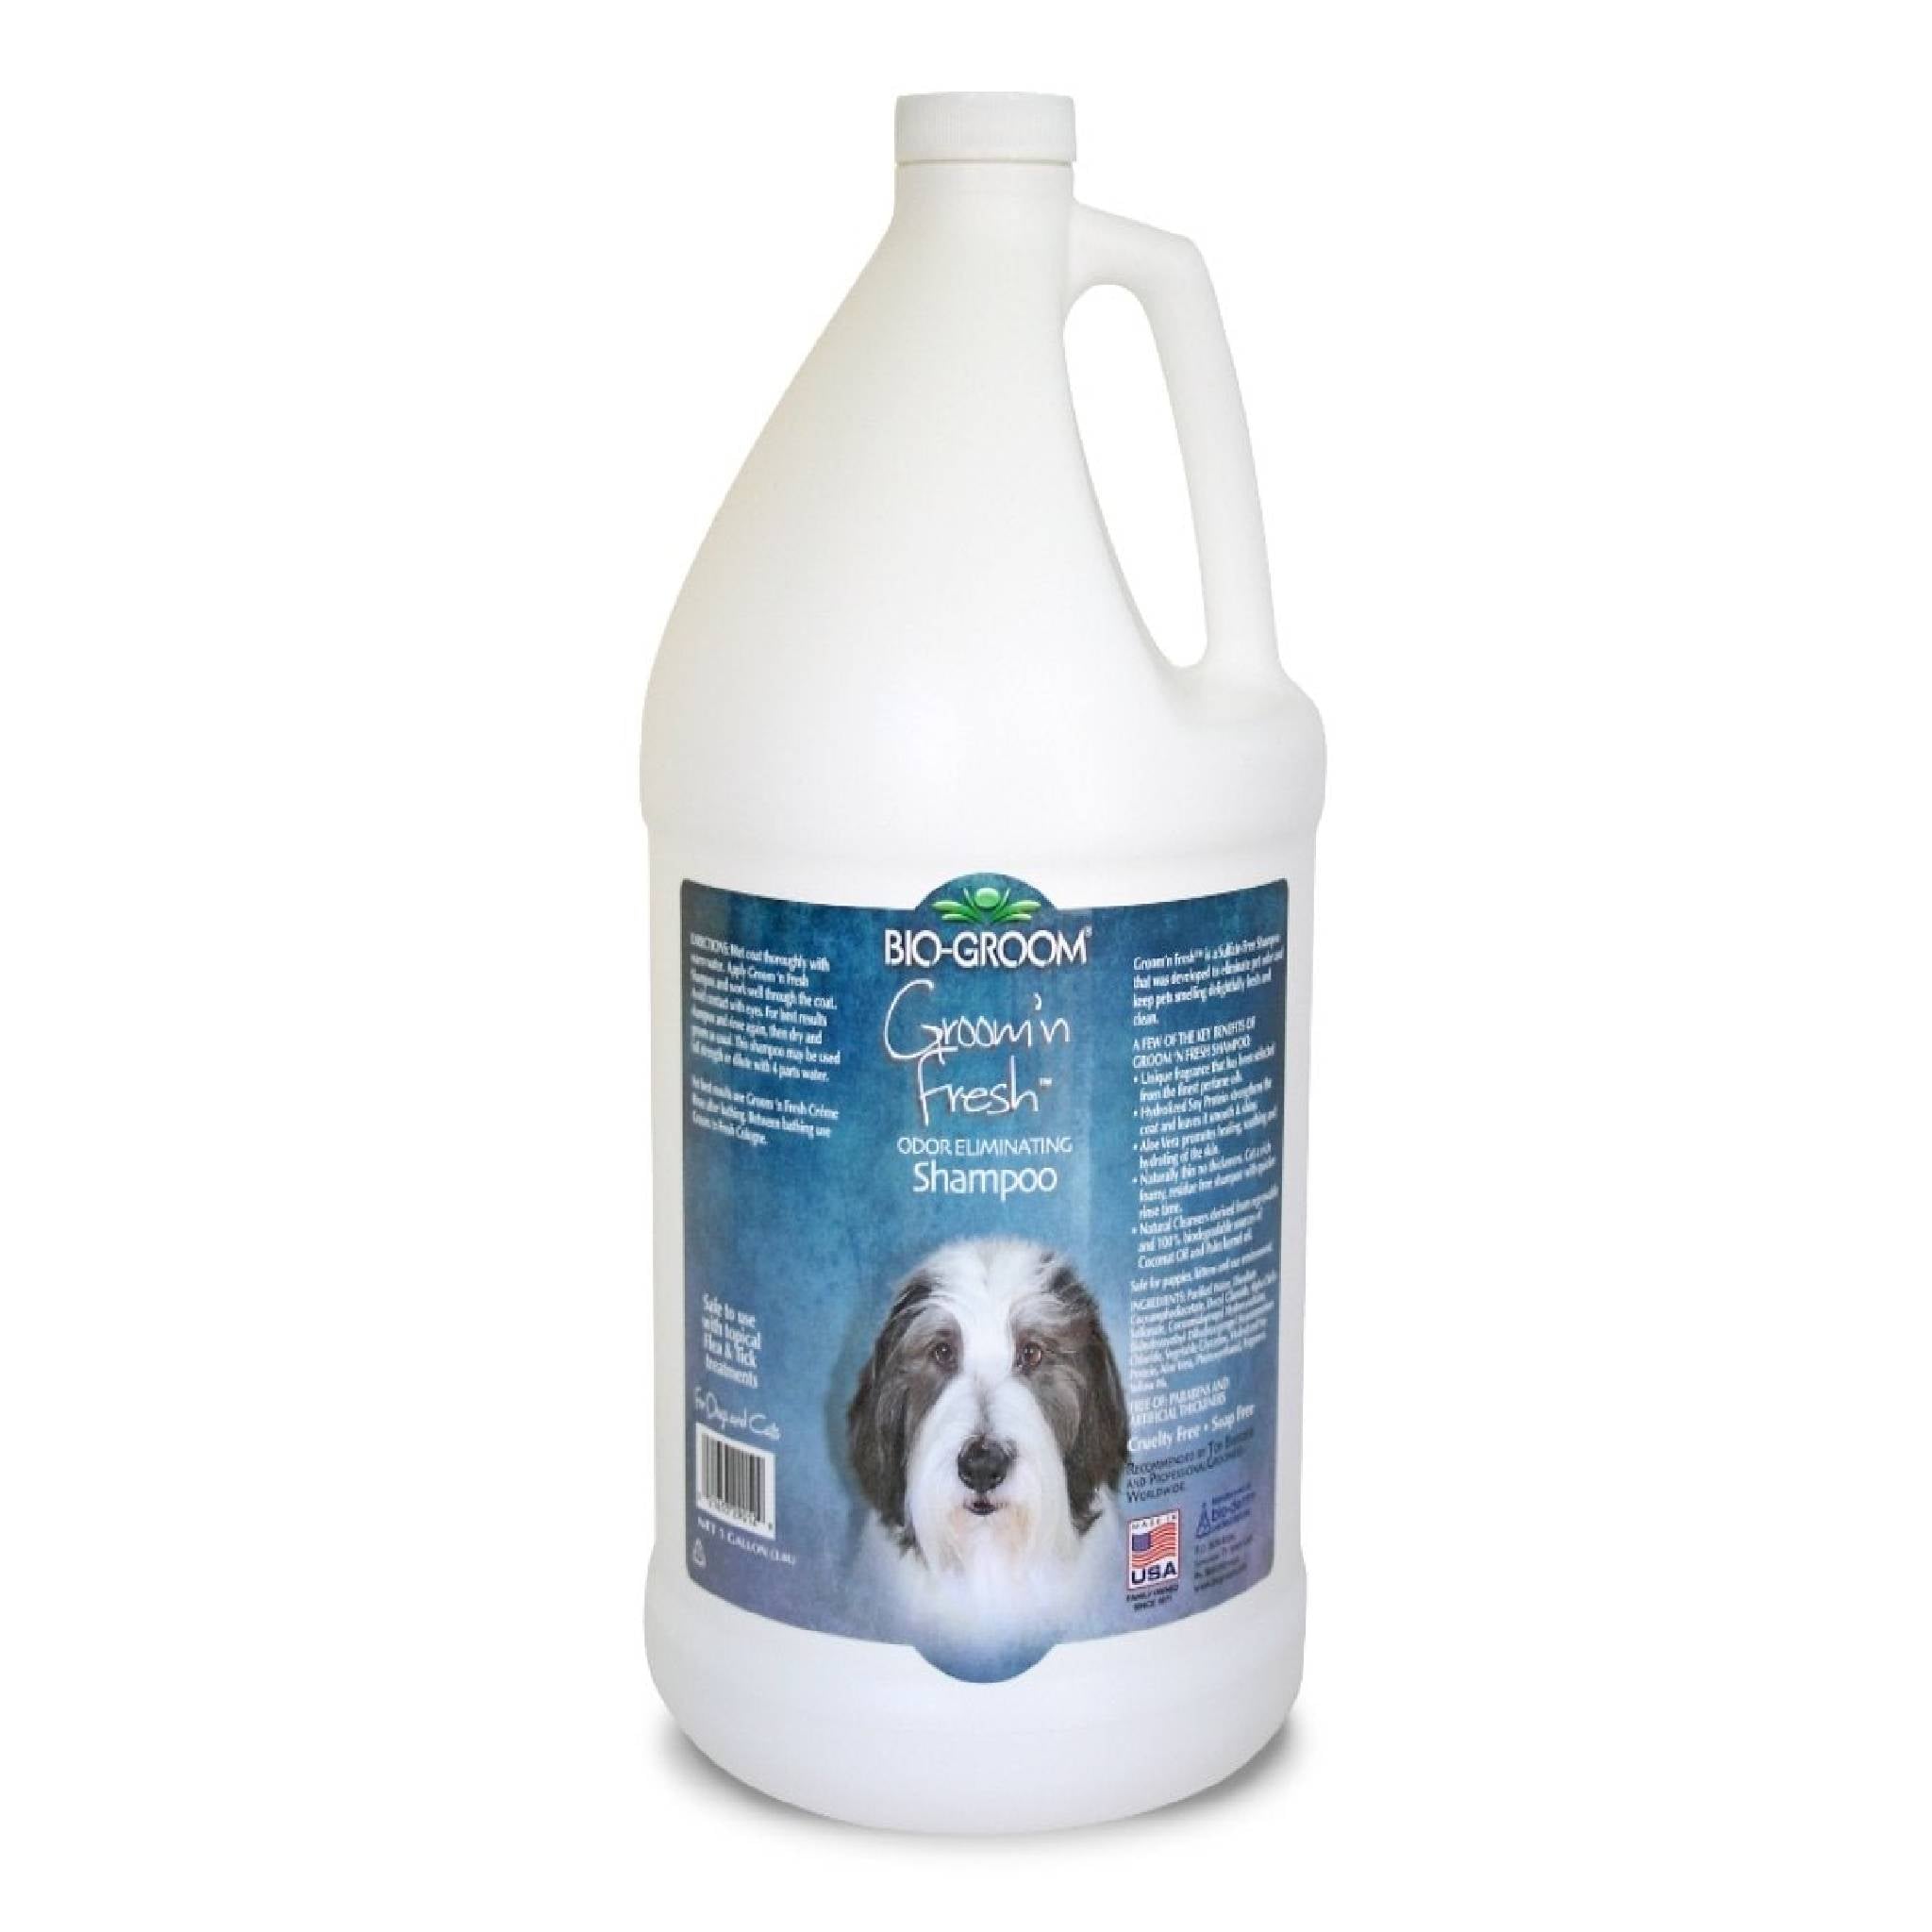 Biogroom Groom 'N Fresh Odour Eliminating Dog Grooming Shampoo for Cats and Dogs